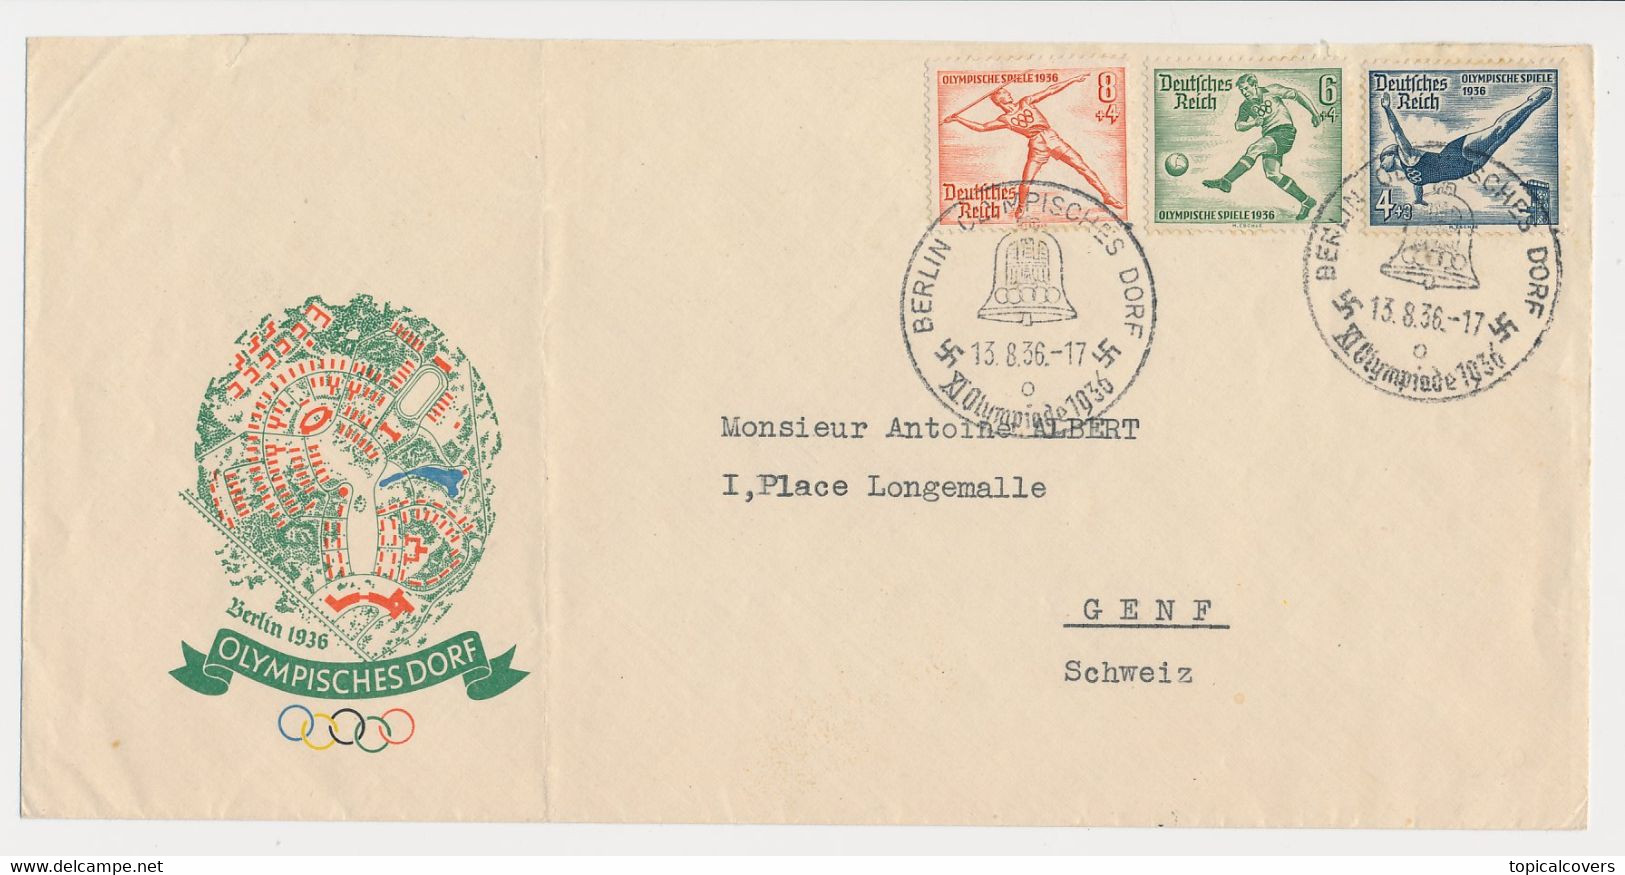 Illustrated Cover / Postmark / Stamps  Olympic Village Olympic Games Berlin 1936 - Sommer 1936: Berlin